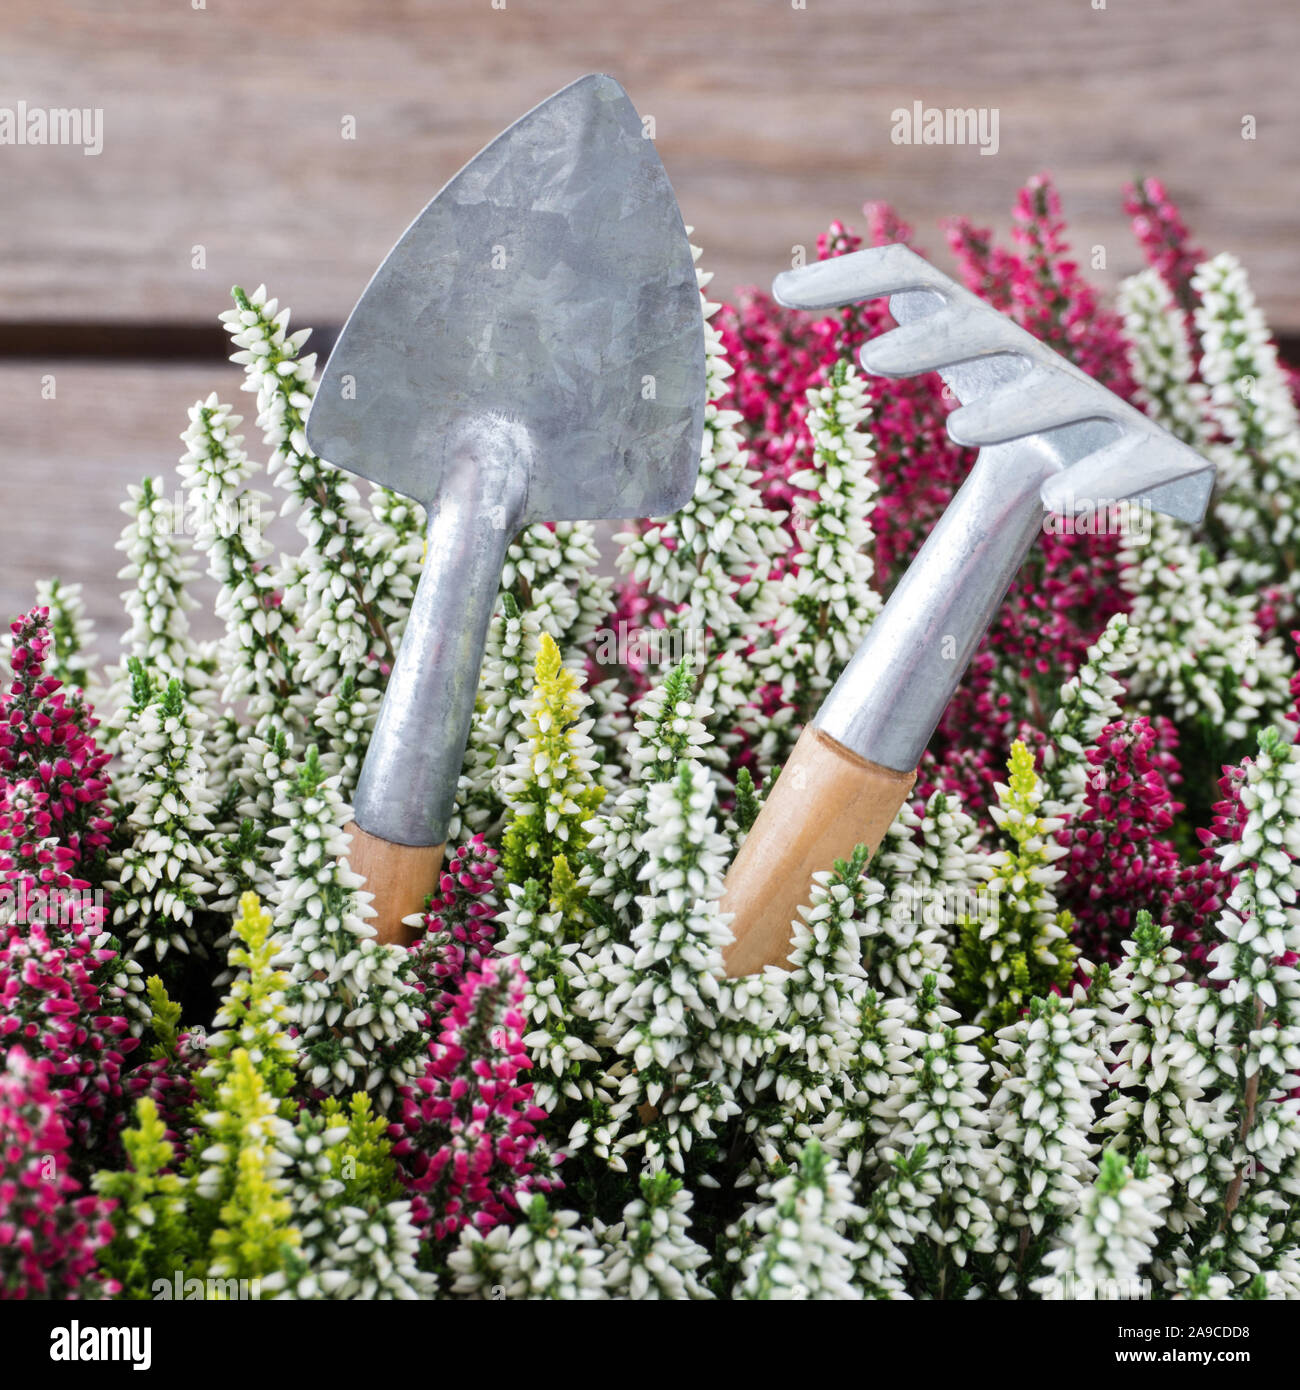 Heather flowers and decoration tools Stock Photo